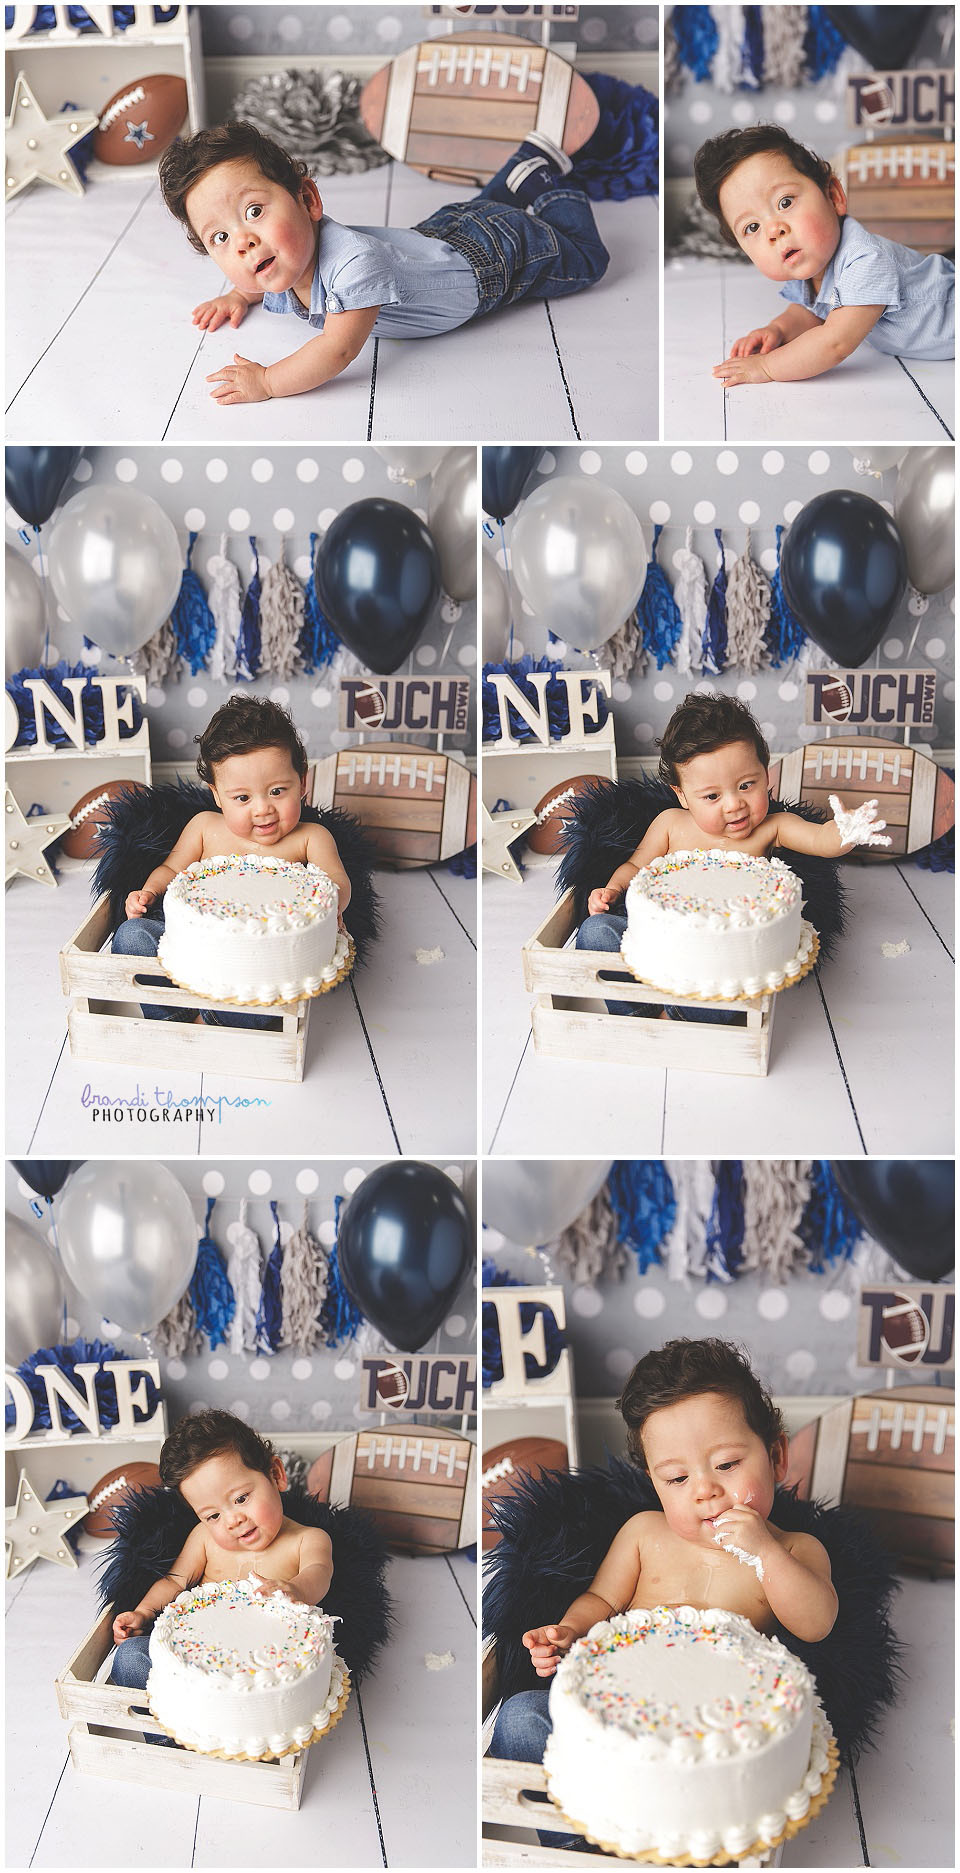 dallas cowboys football themed cake smash in plano, tx studio with one year old baby boy